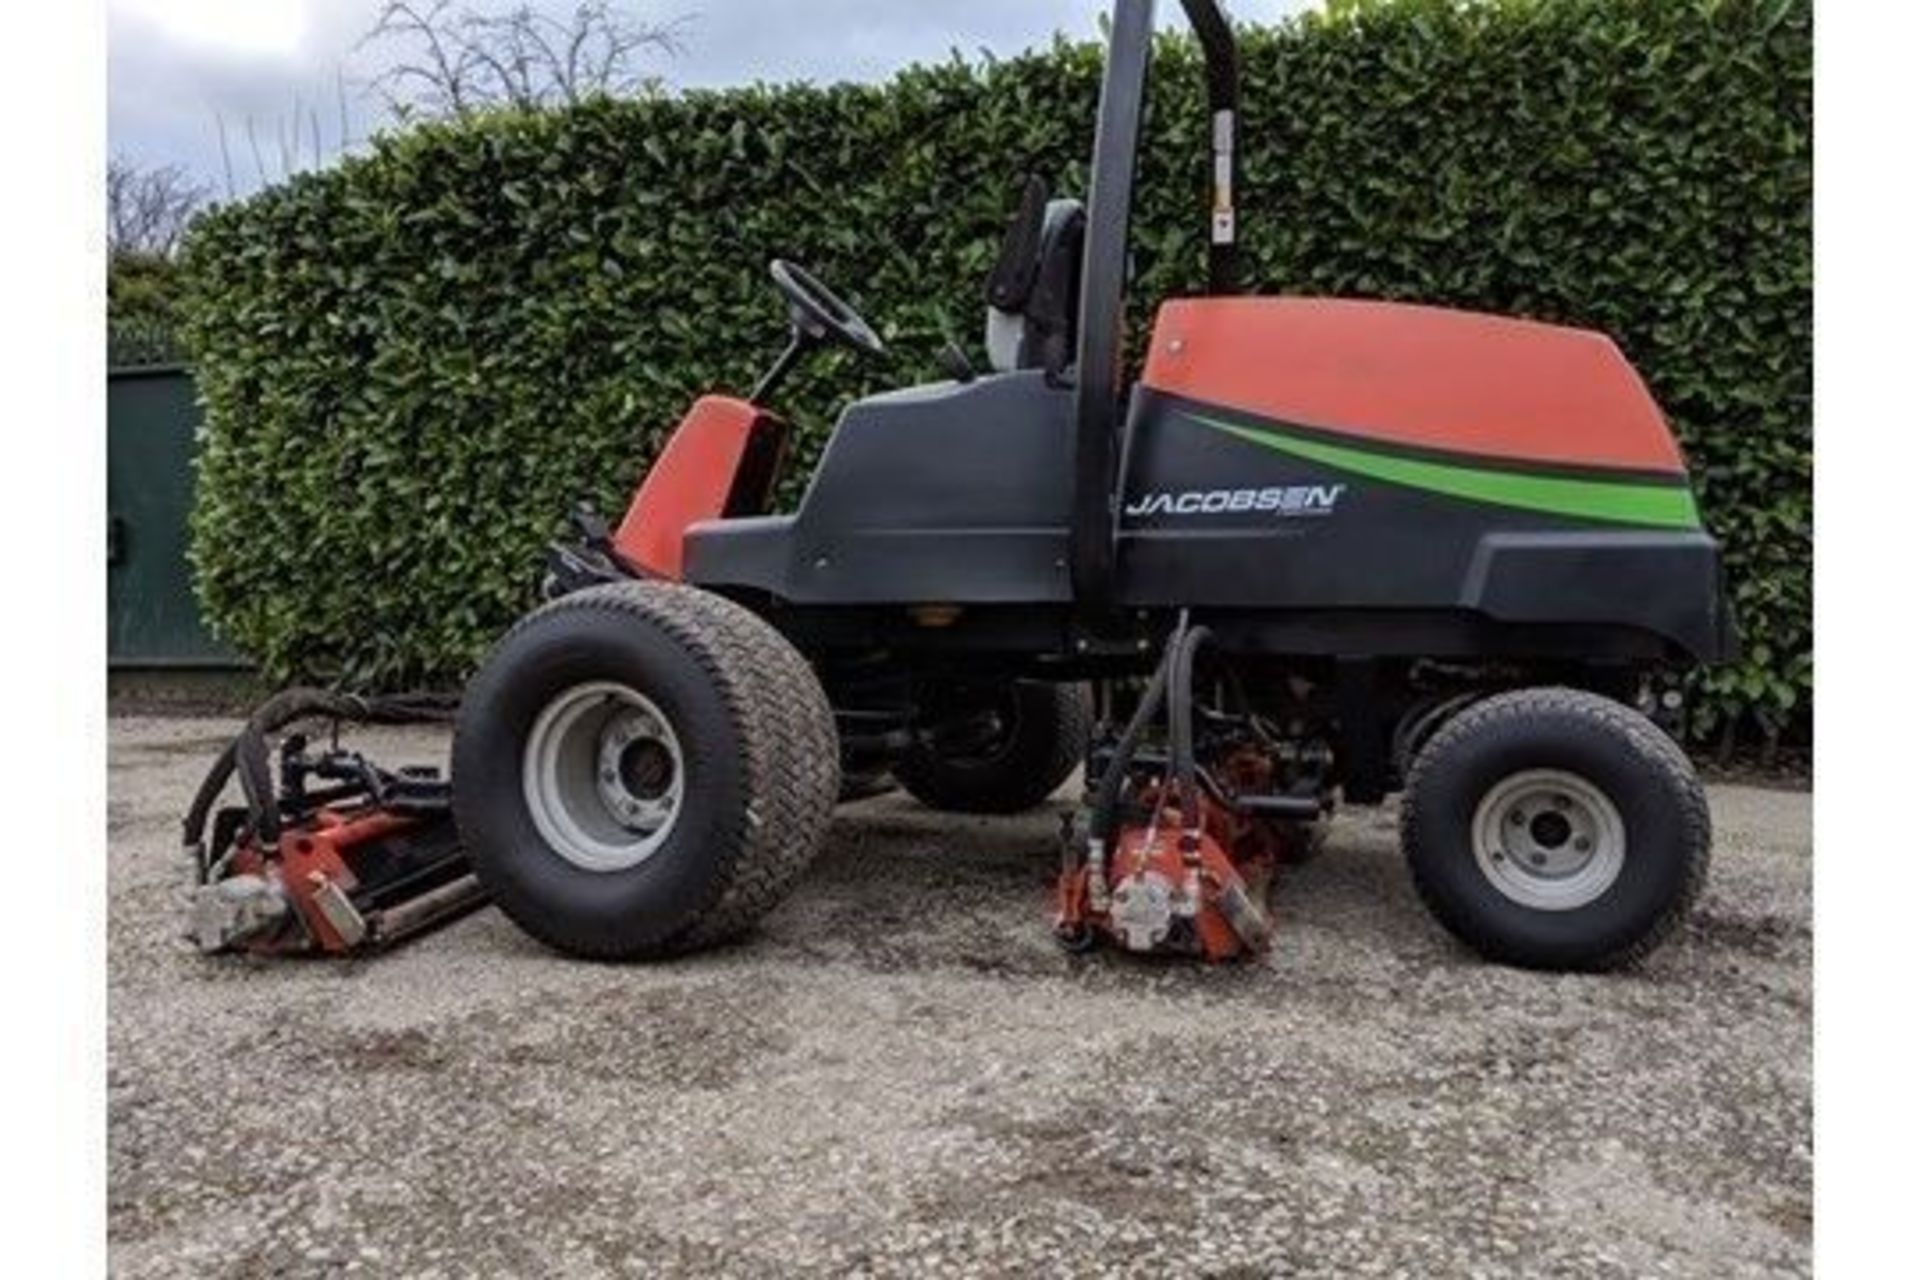 2007 Ransomes Jacobsen LF3800 4WD Cylinder Mower - Image 4 of 8